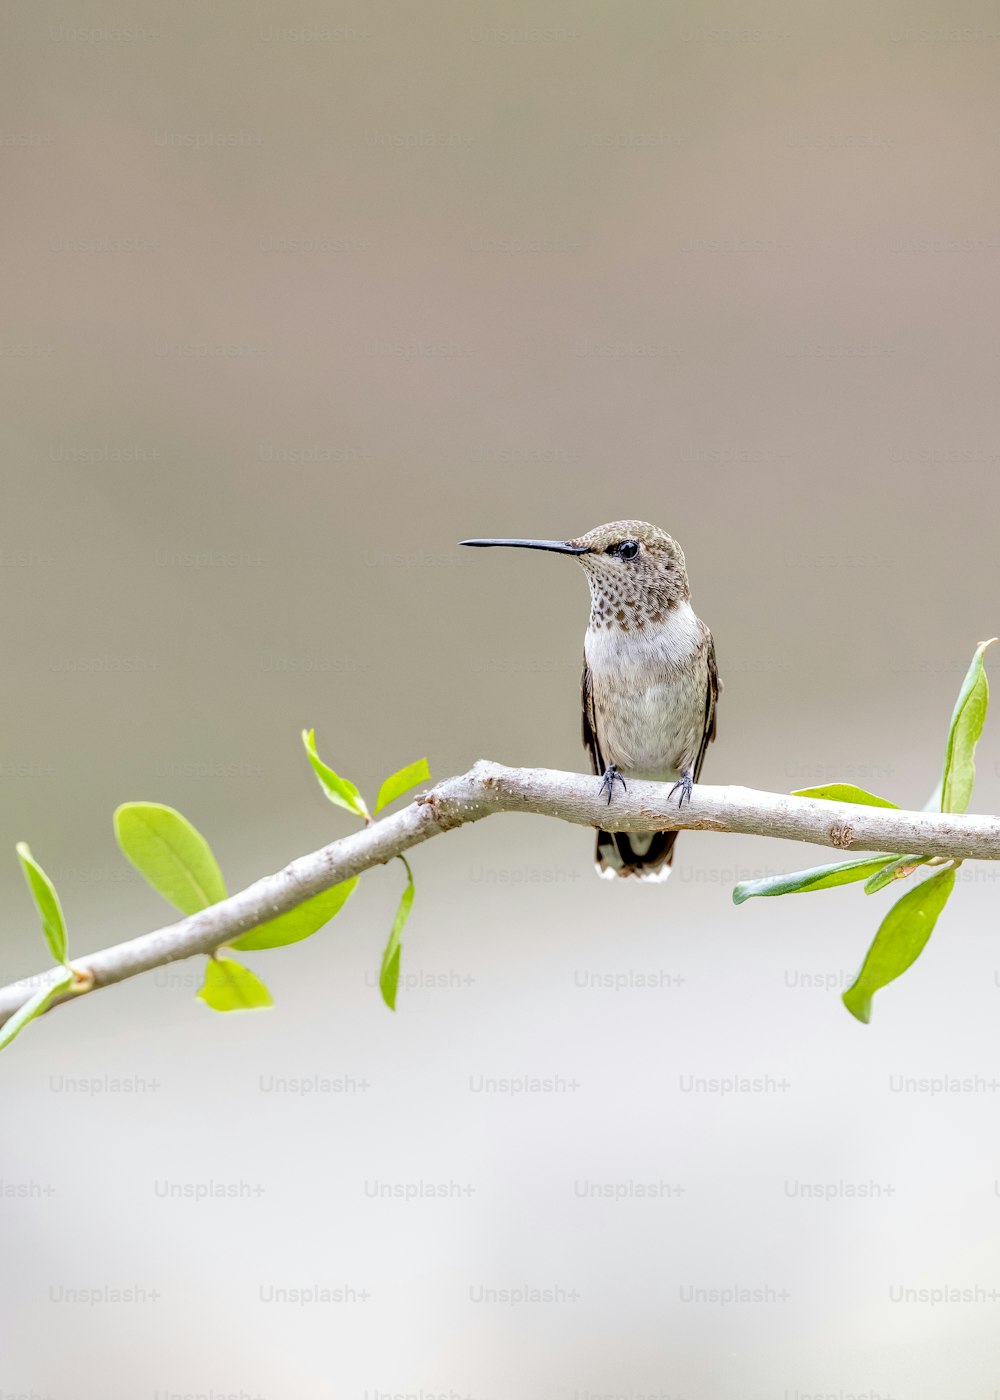 a hummingbird perched on a branch with green leaves